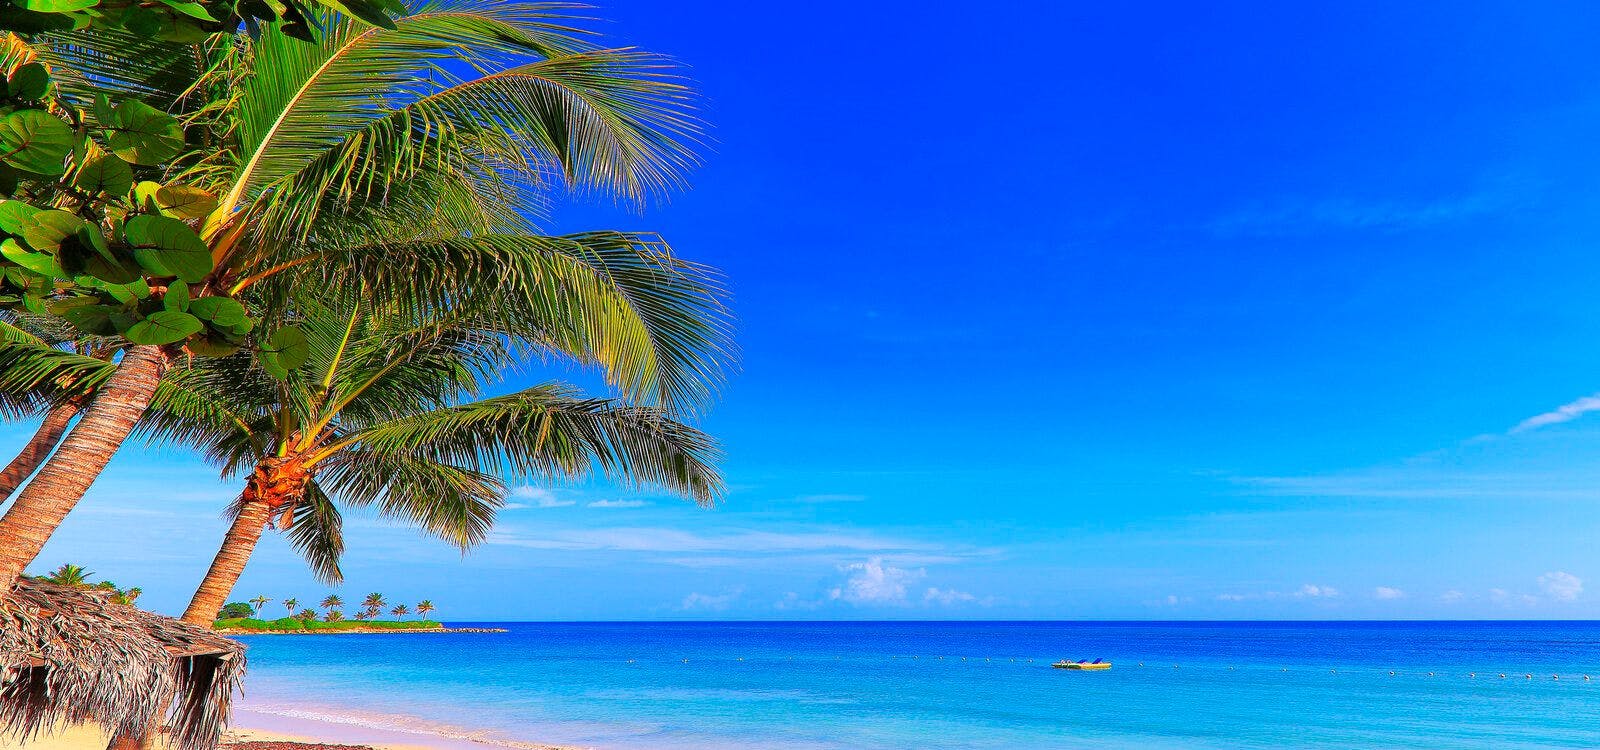 Montego Bay in Jamaica with palm trees and Caribbean Sea